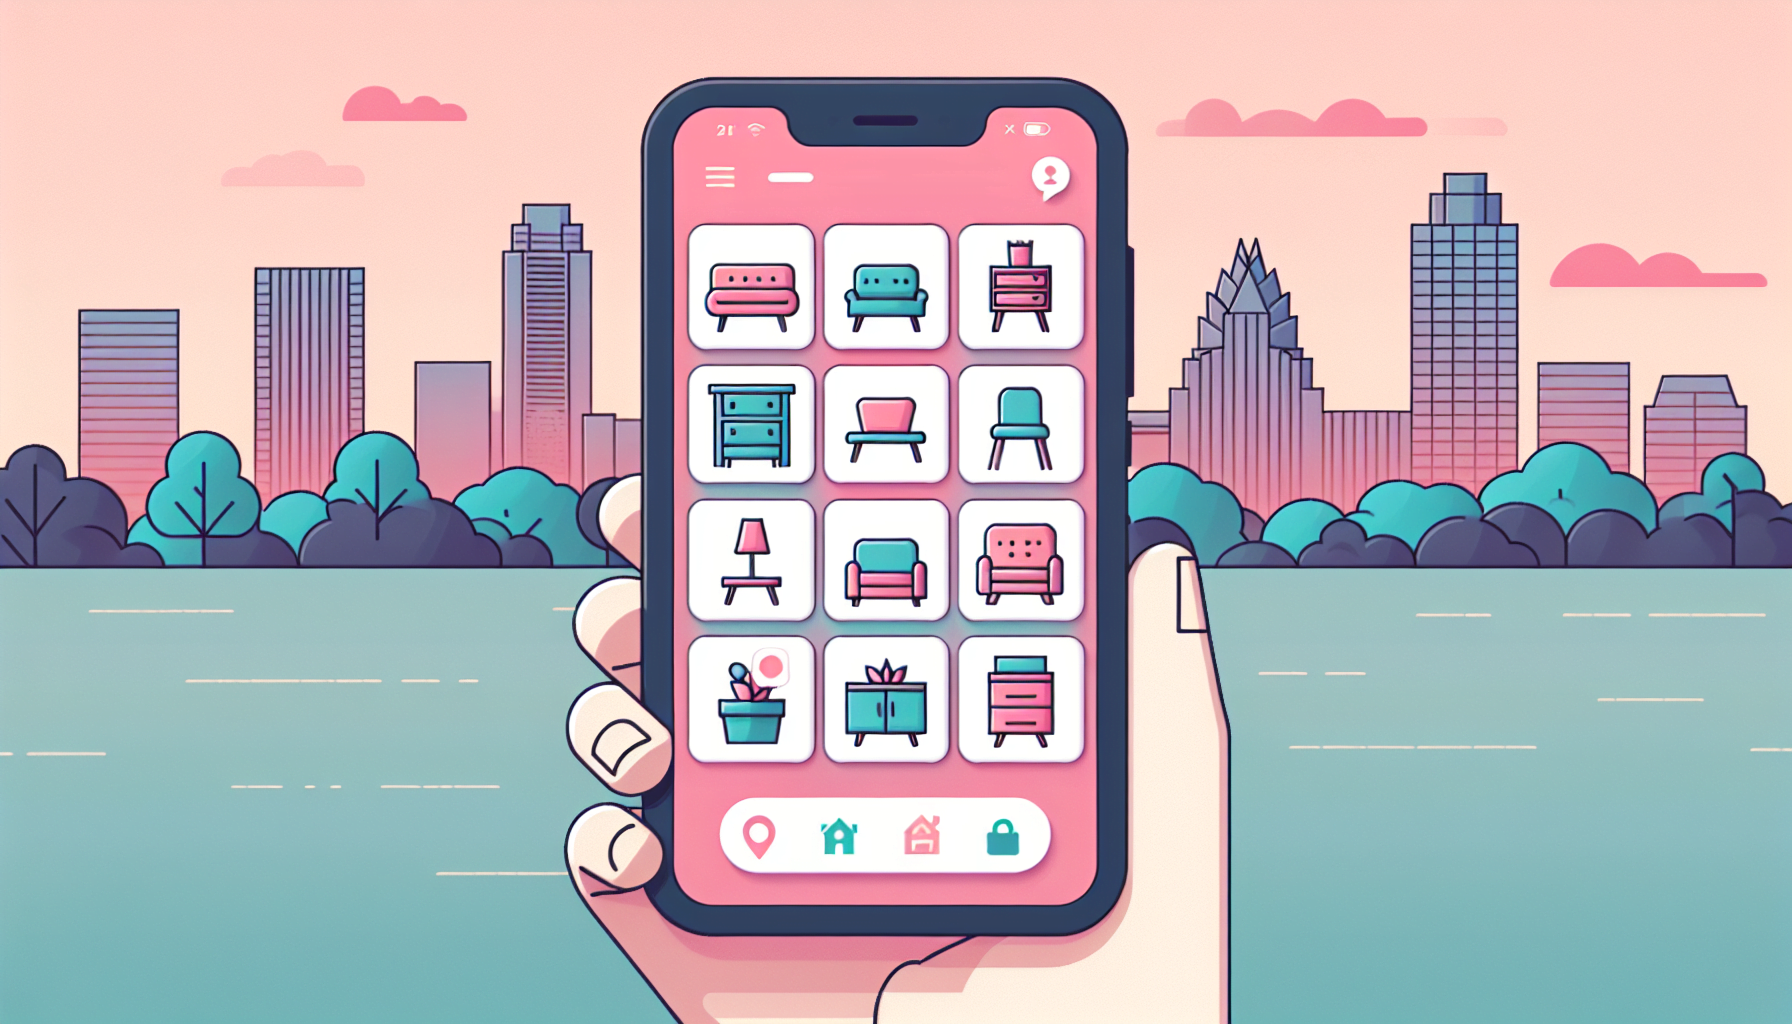 Letgo app logo and interface for selling furniture in Austin